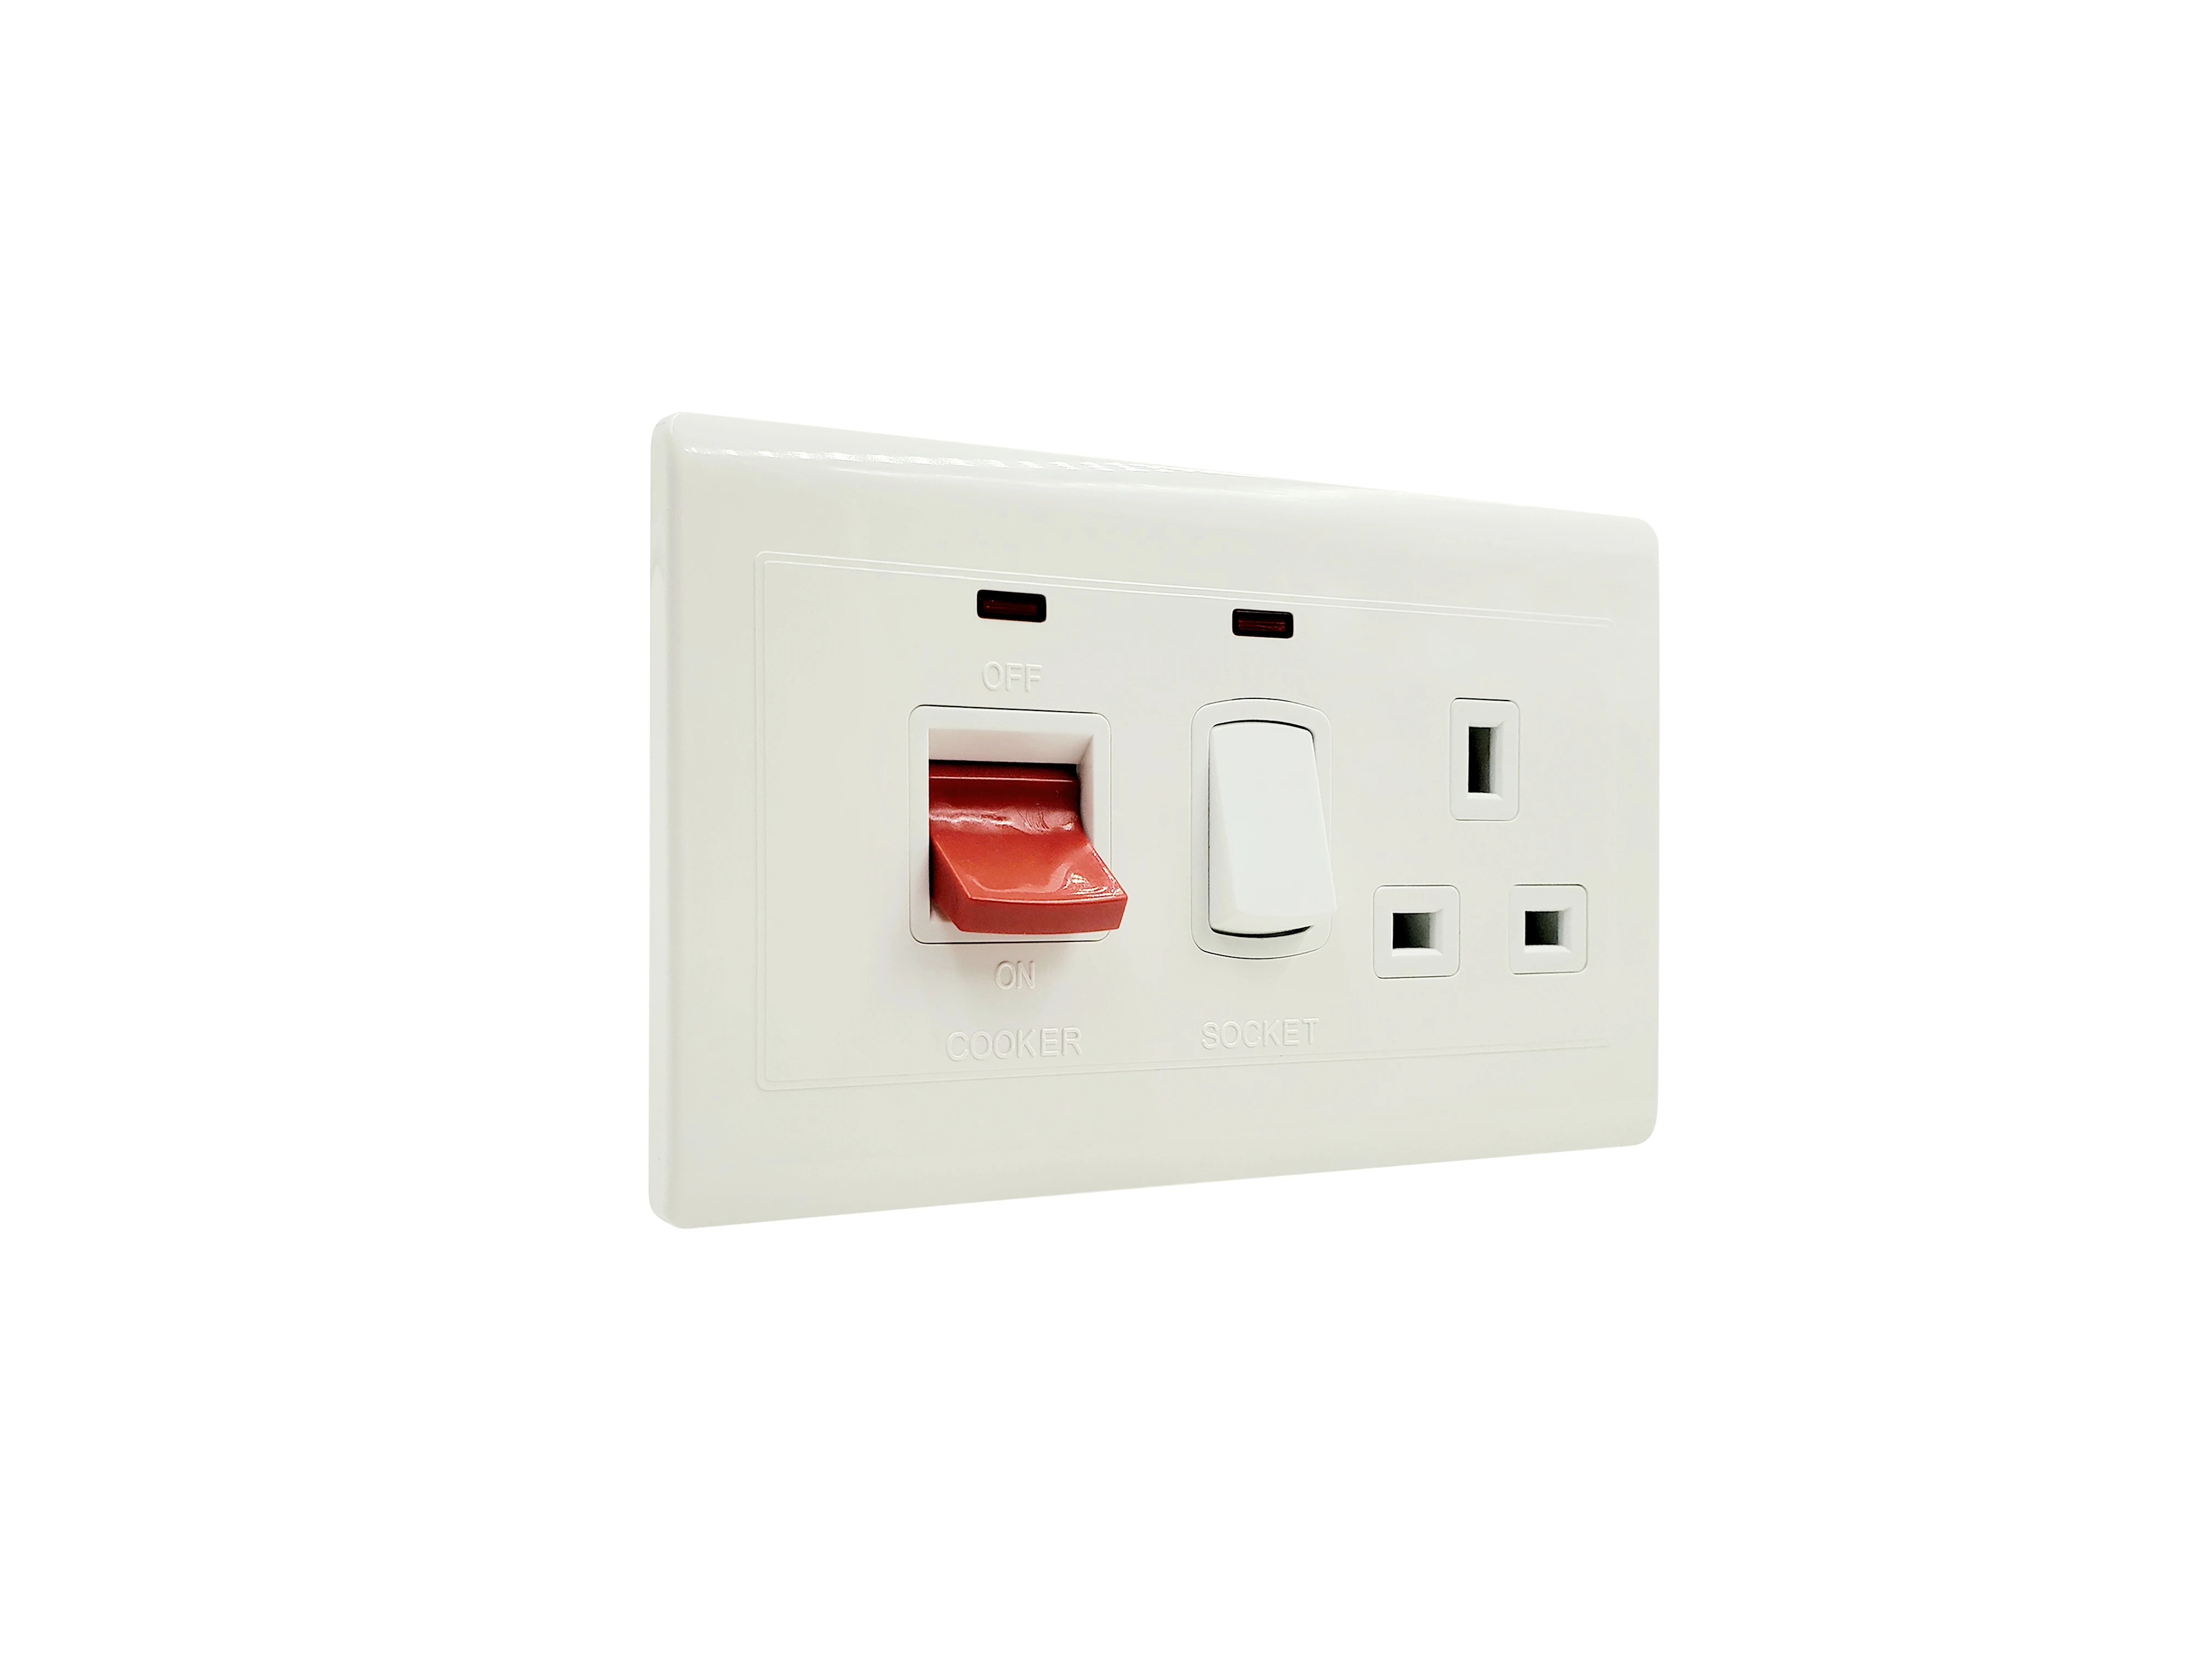 Bihu white 45A cooker wall switch socket with led indicator for home